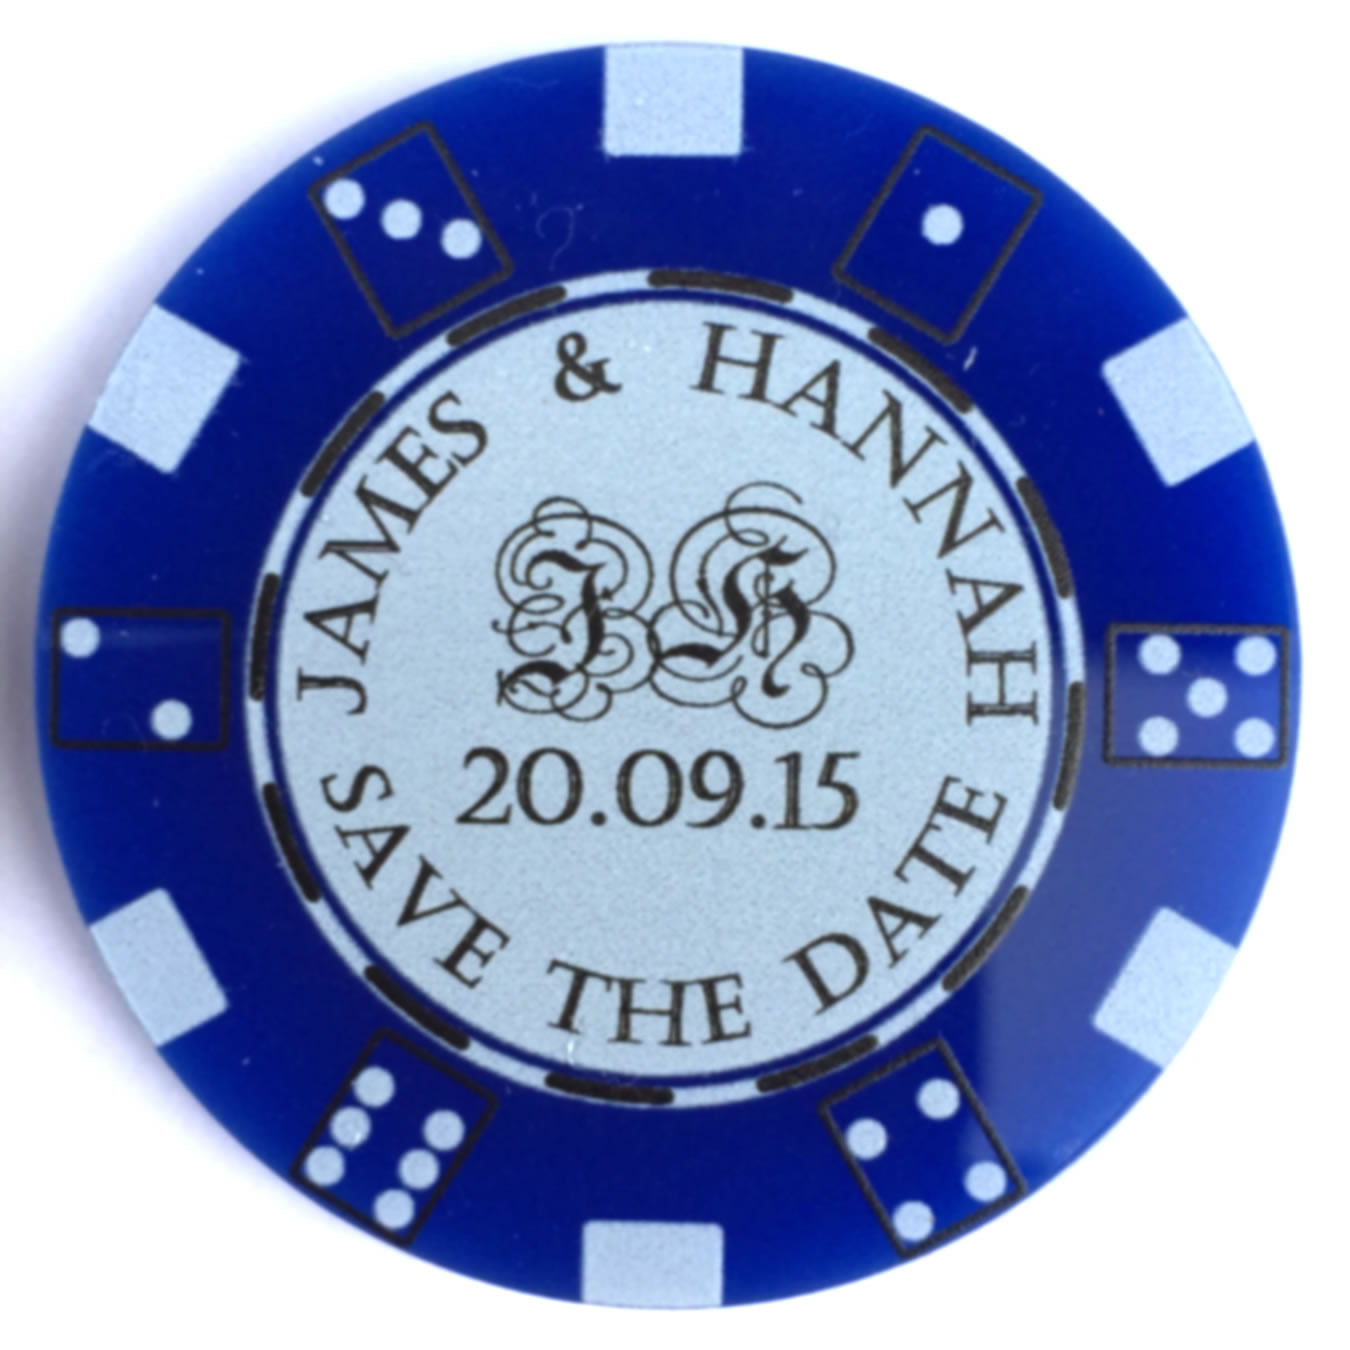 Save the Dates Wedding Poker Chips Las Vegas Casino Party Invitations - Pack of 10